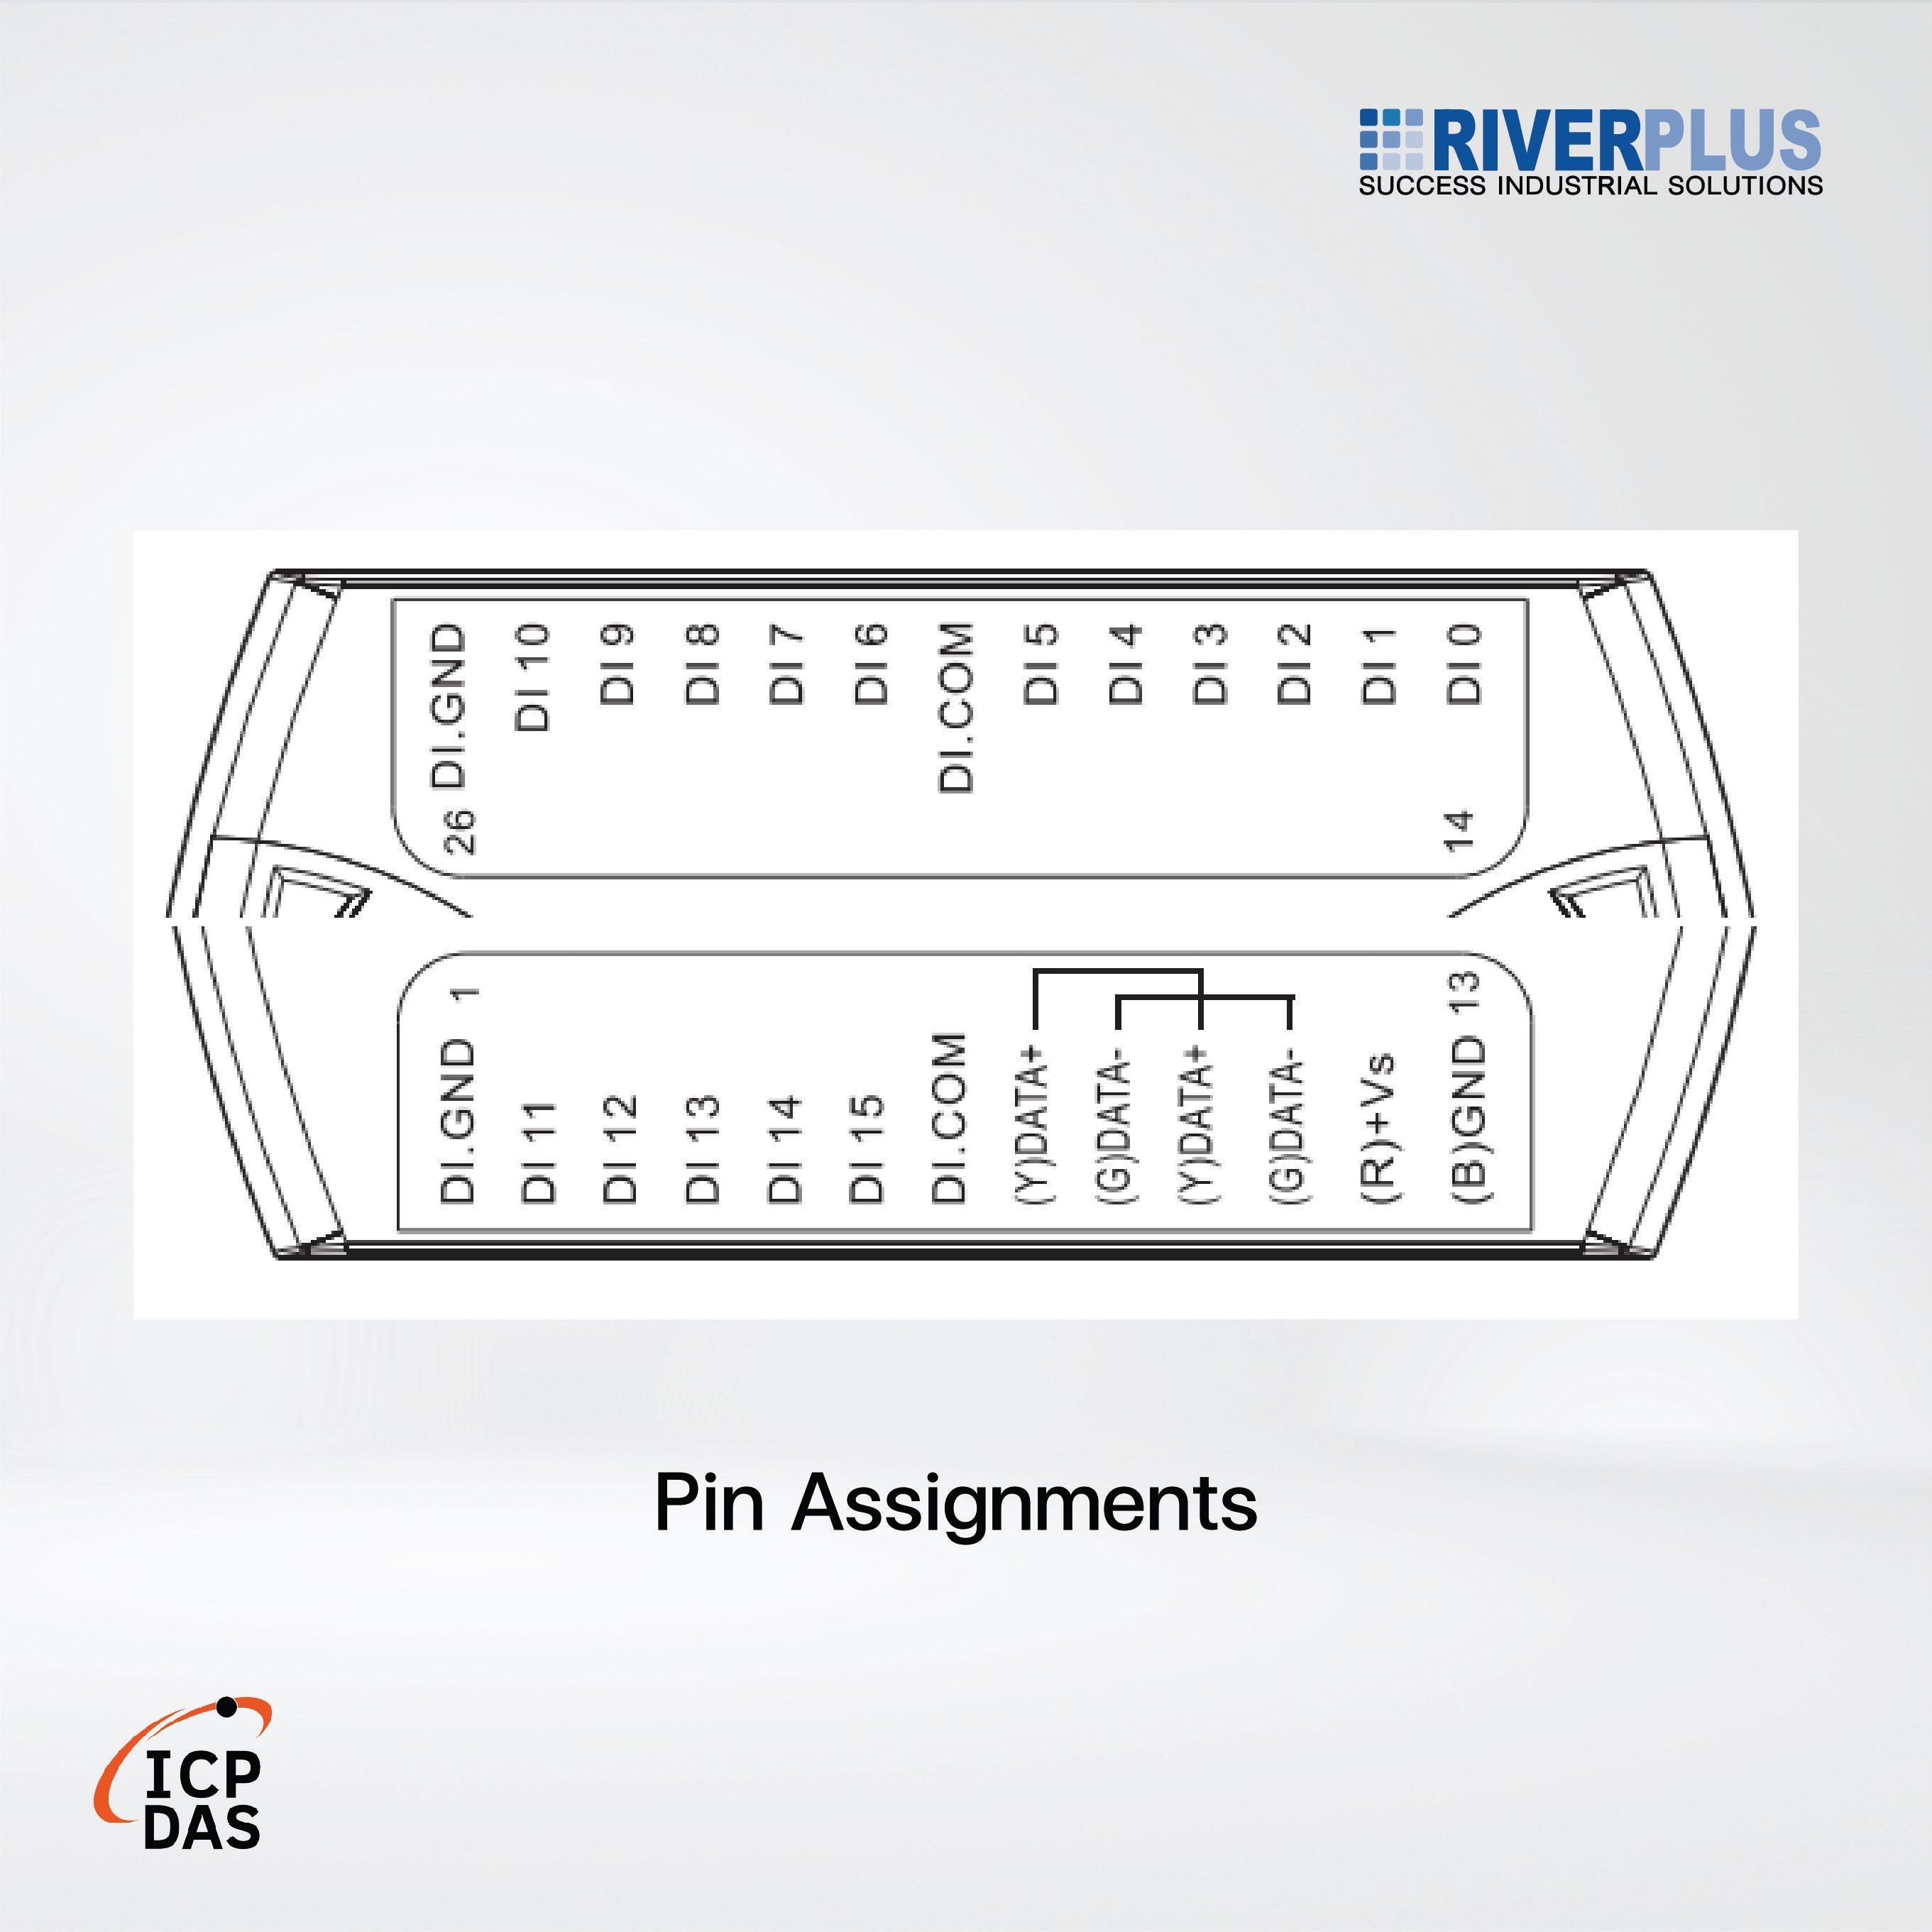 I-7051 16-ch Isolated (Dry, Wet) DI Module - Riverplus